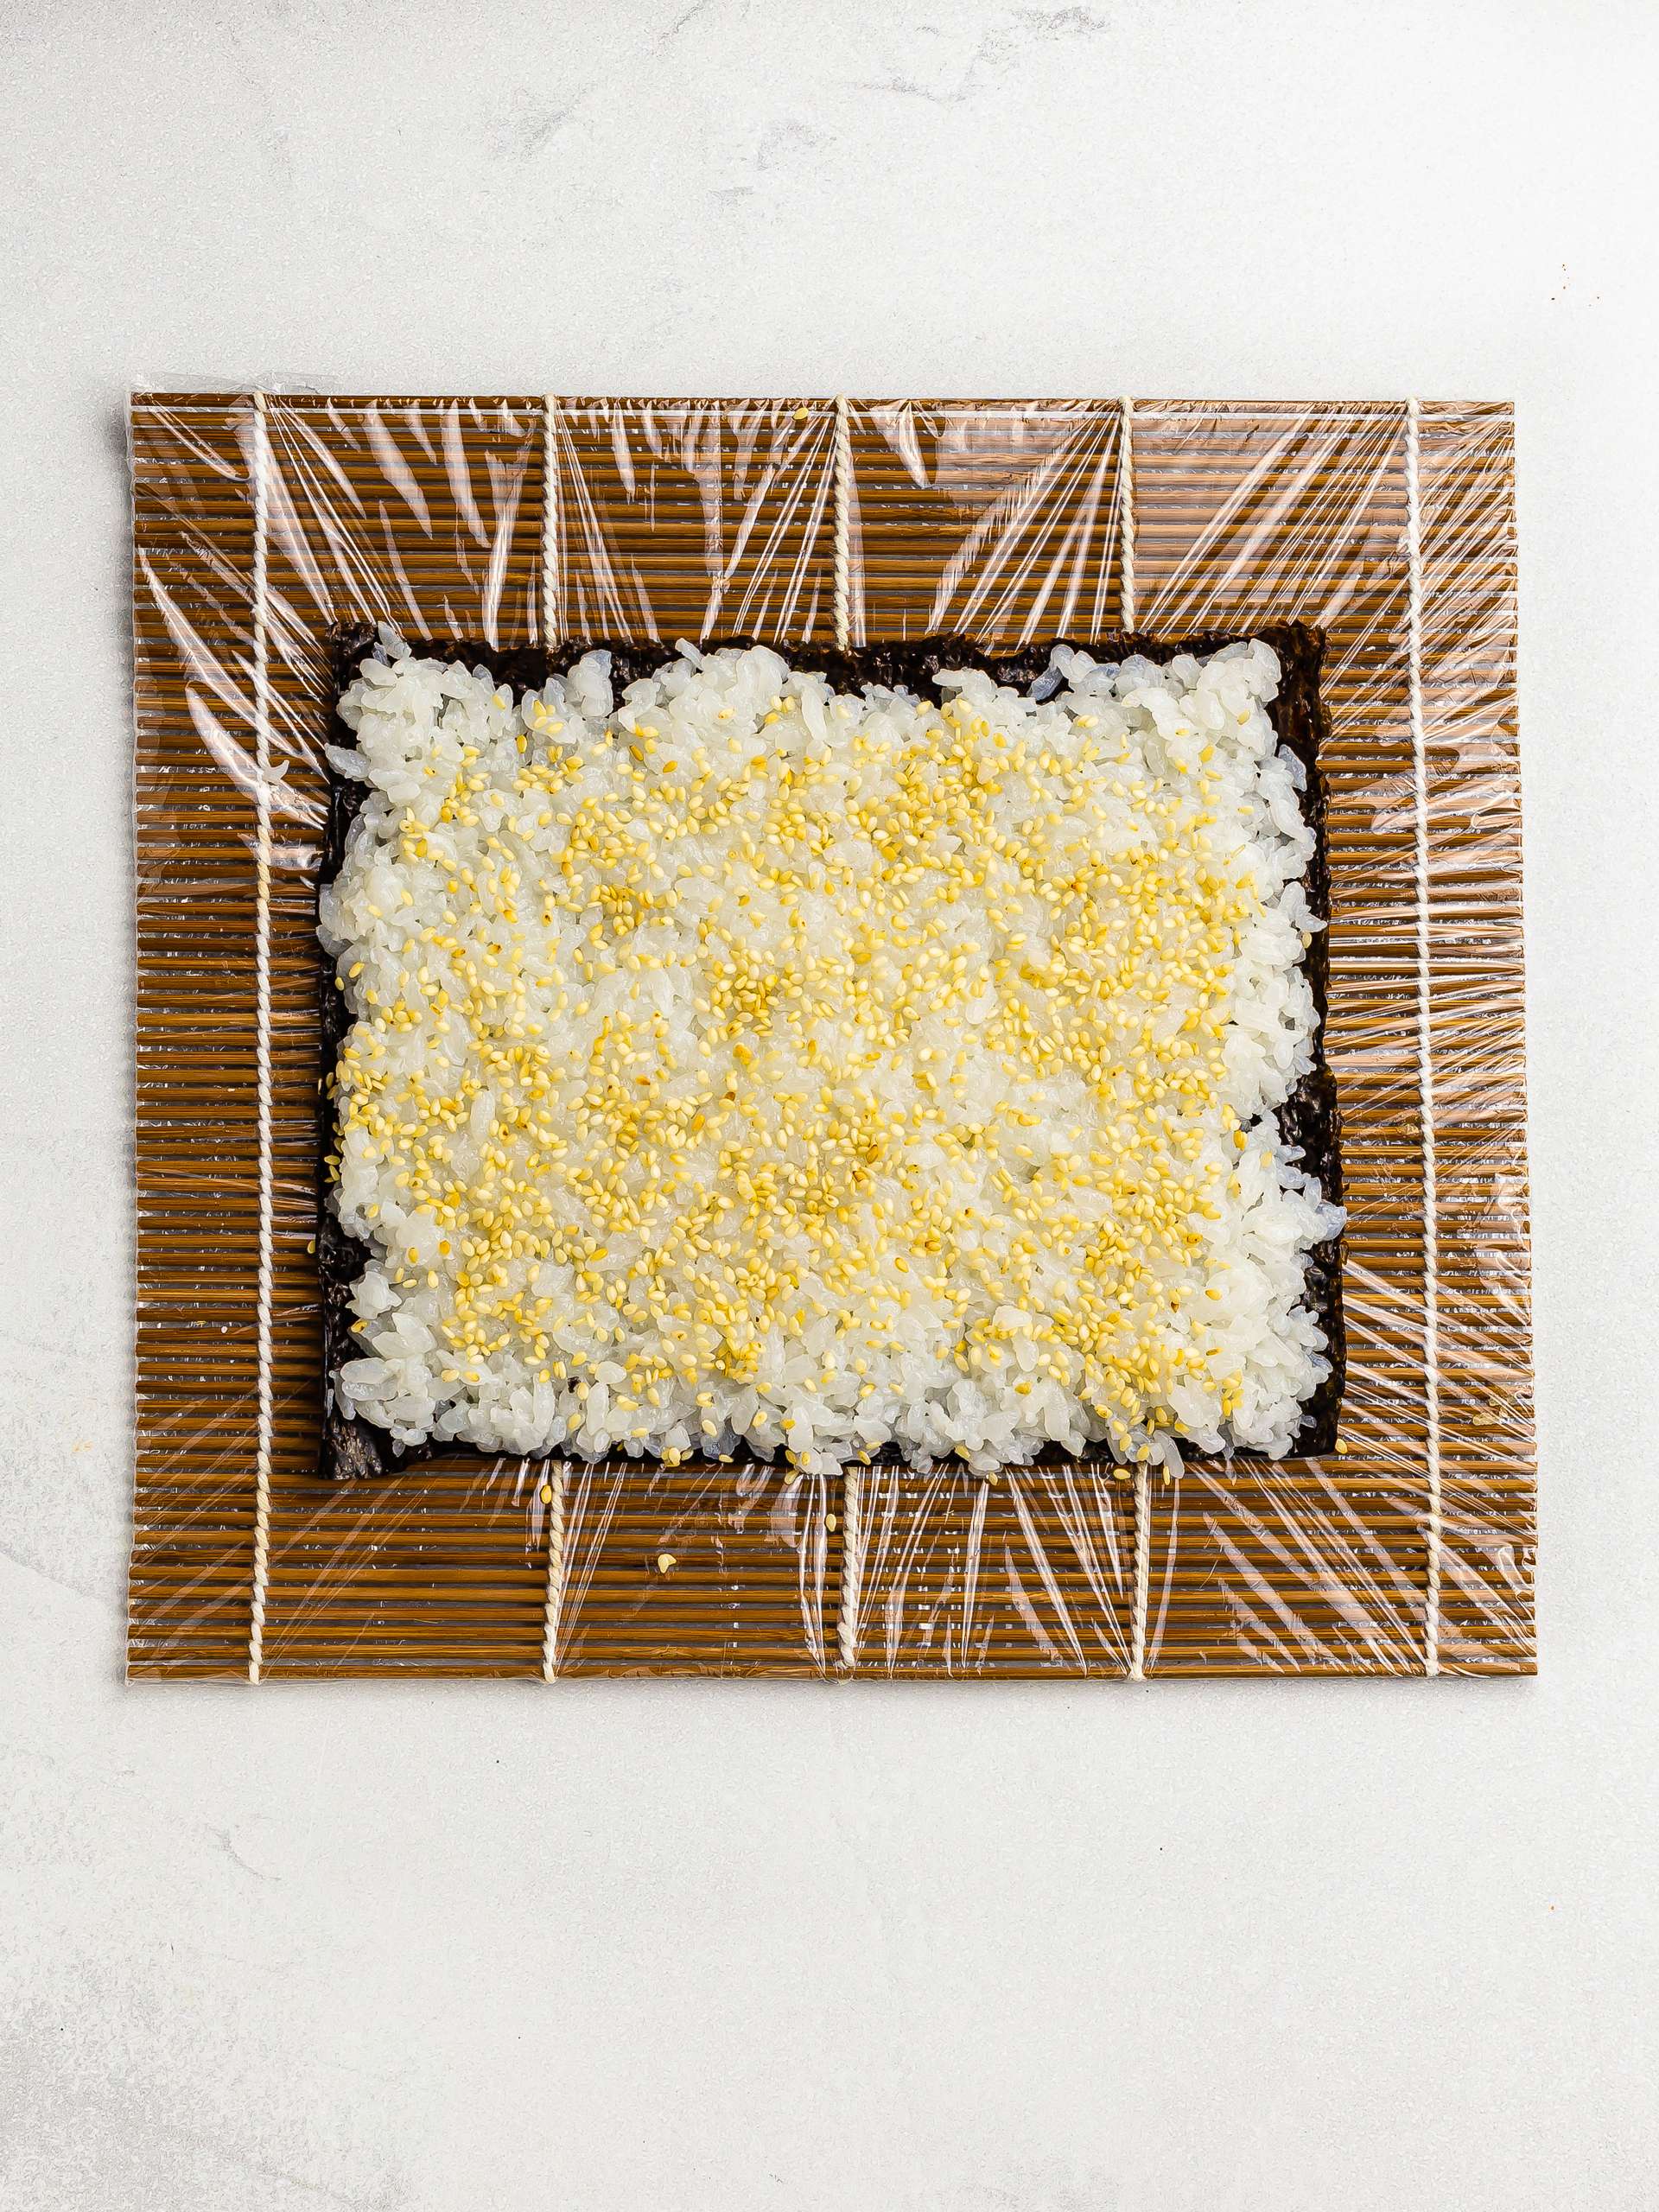 nori sheet with rice and sesame seeds